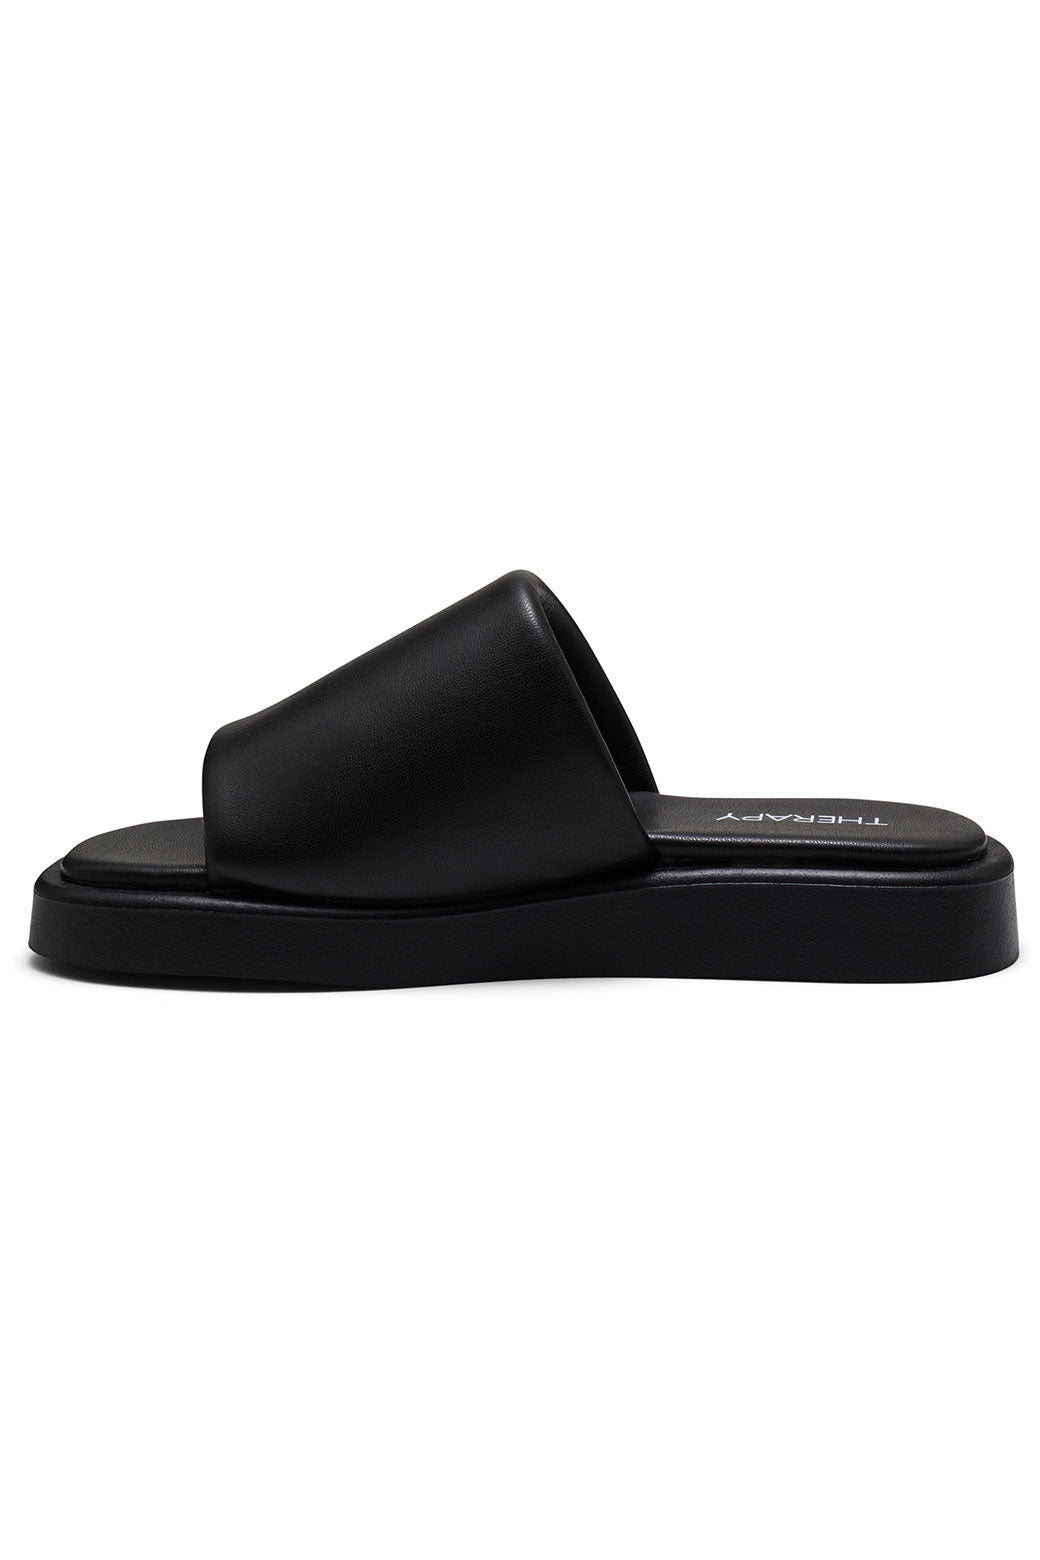 FINAL SALE Therapy Puffy Slides Black